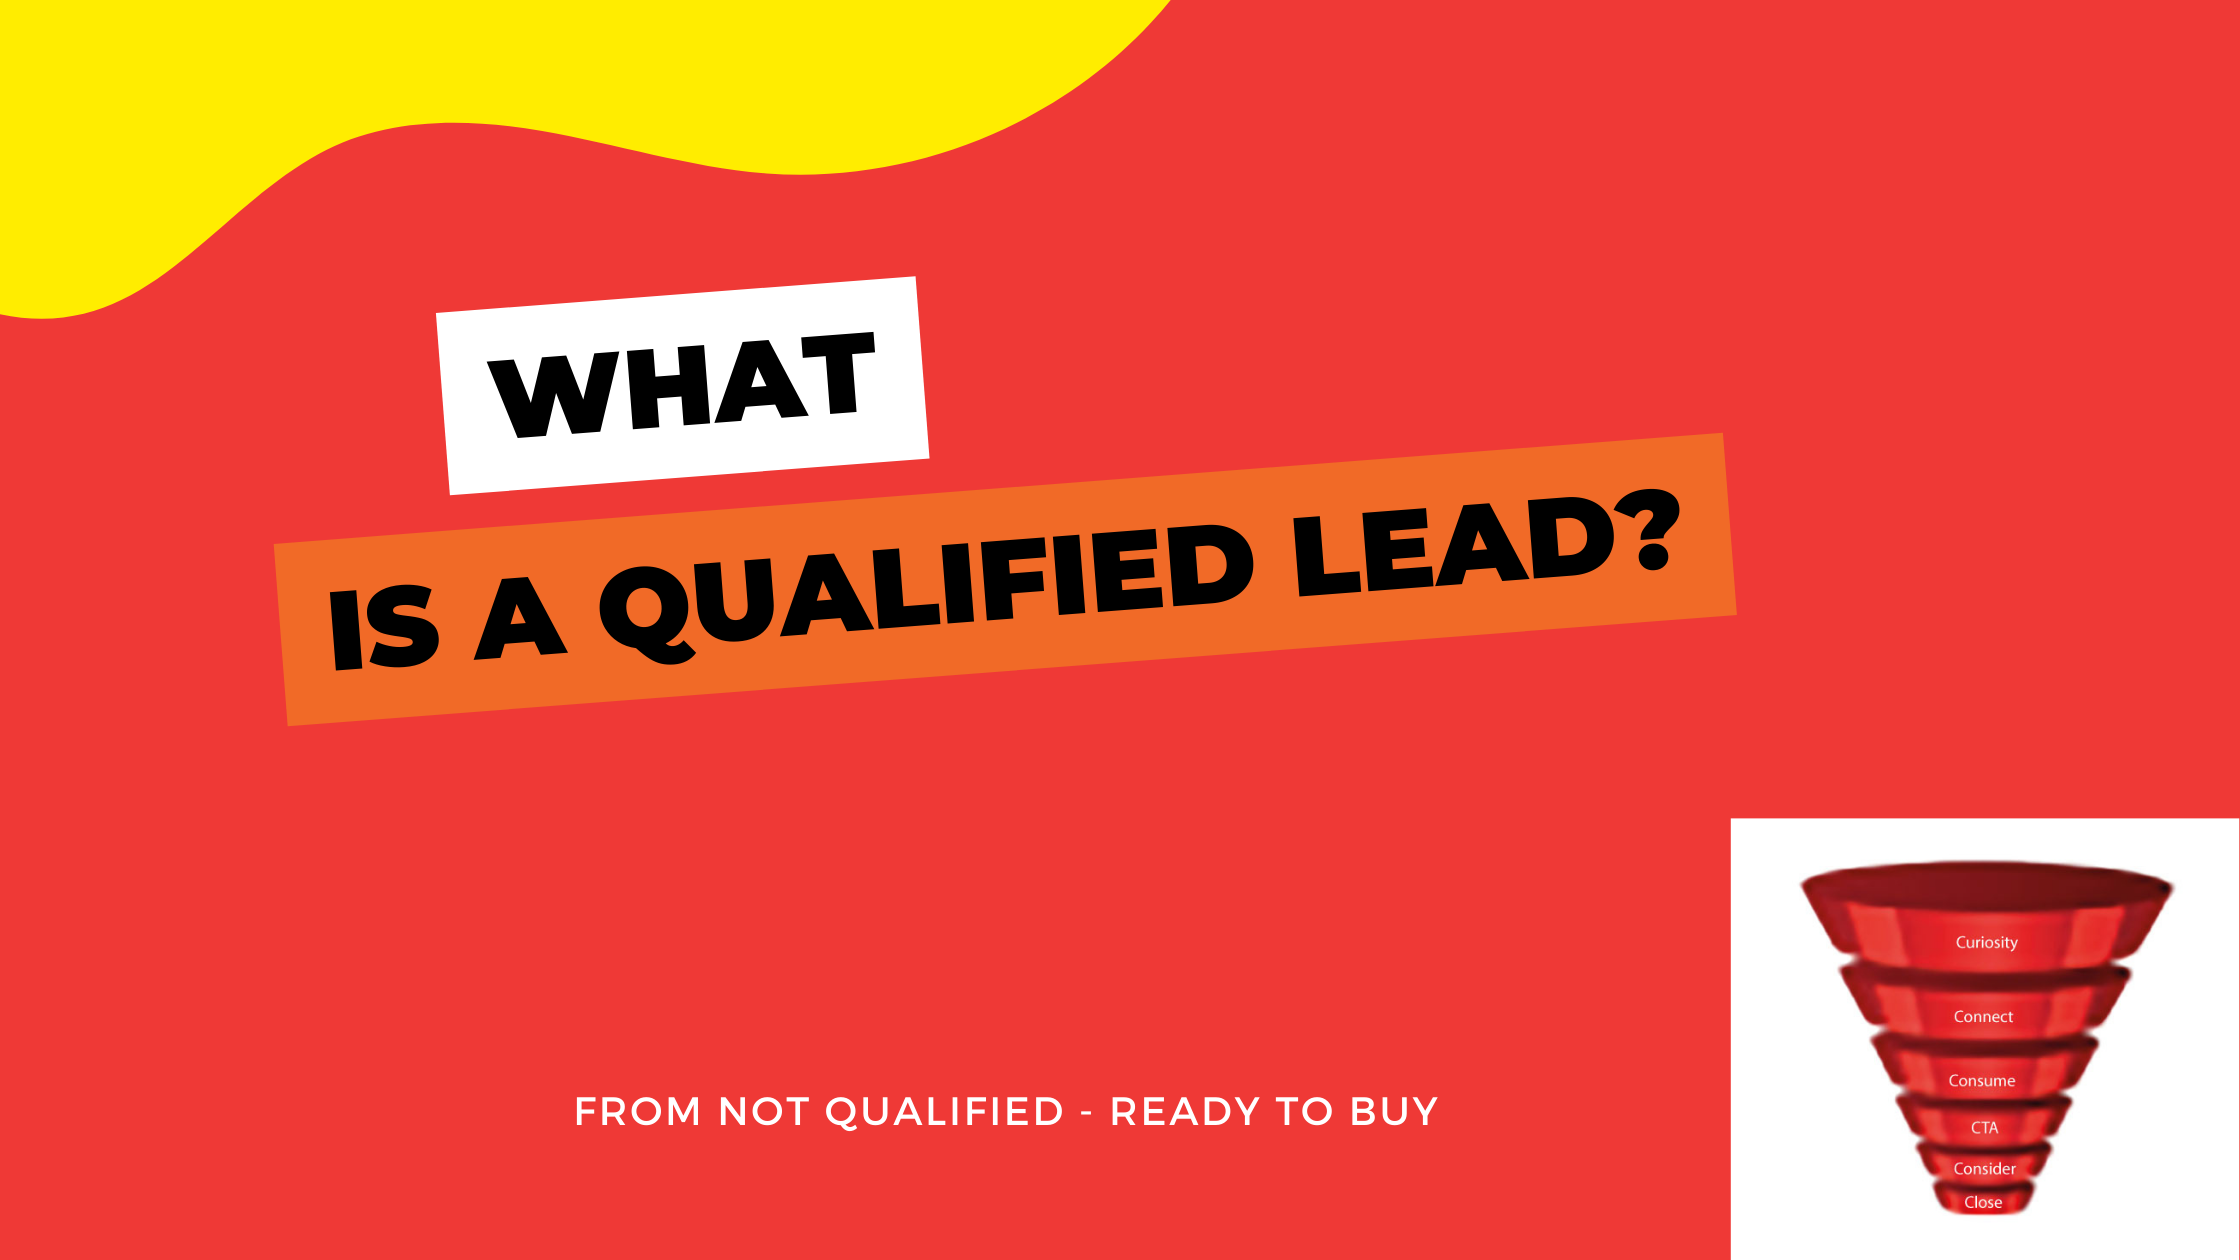 Qualifying leads will enable you to communiate more effectively with them.